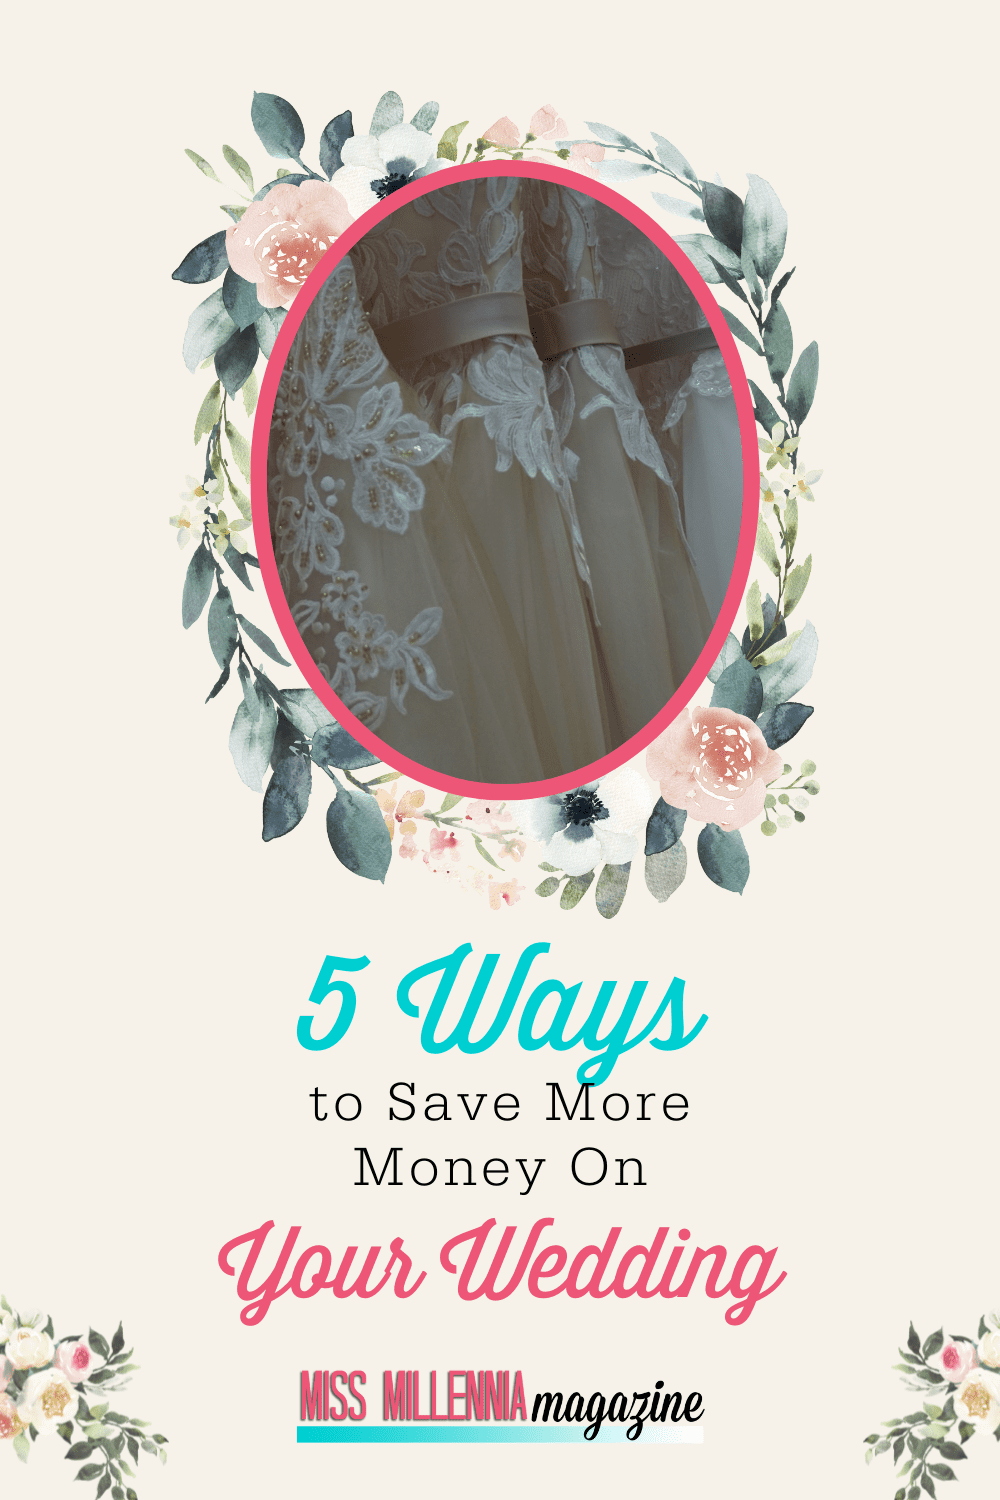 5 Ways to Save More Money On Your Wedding